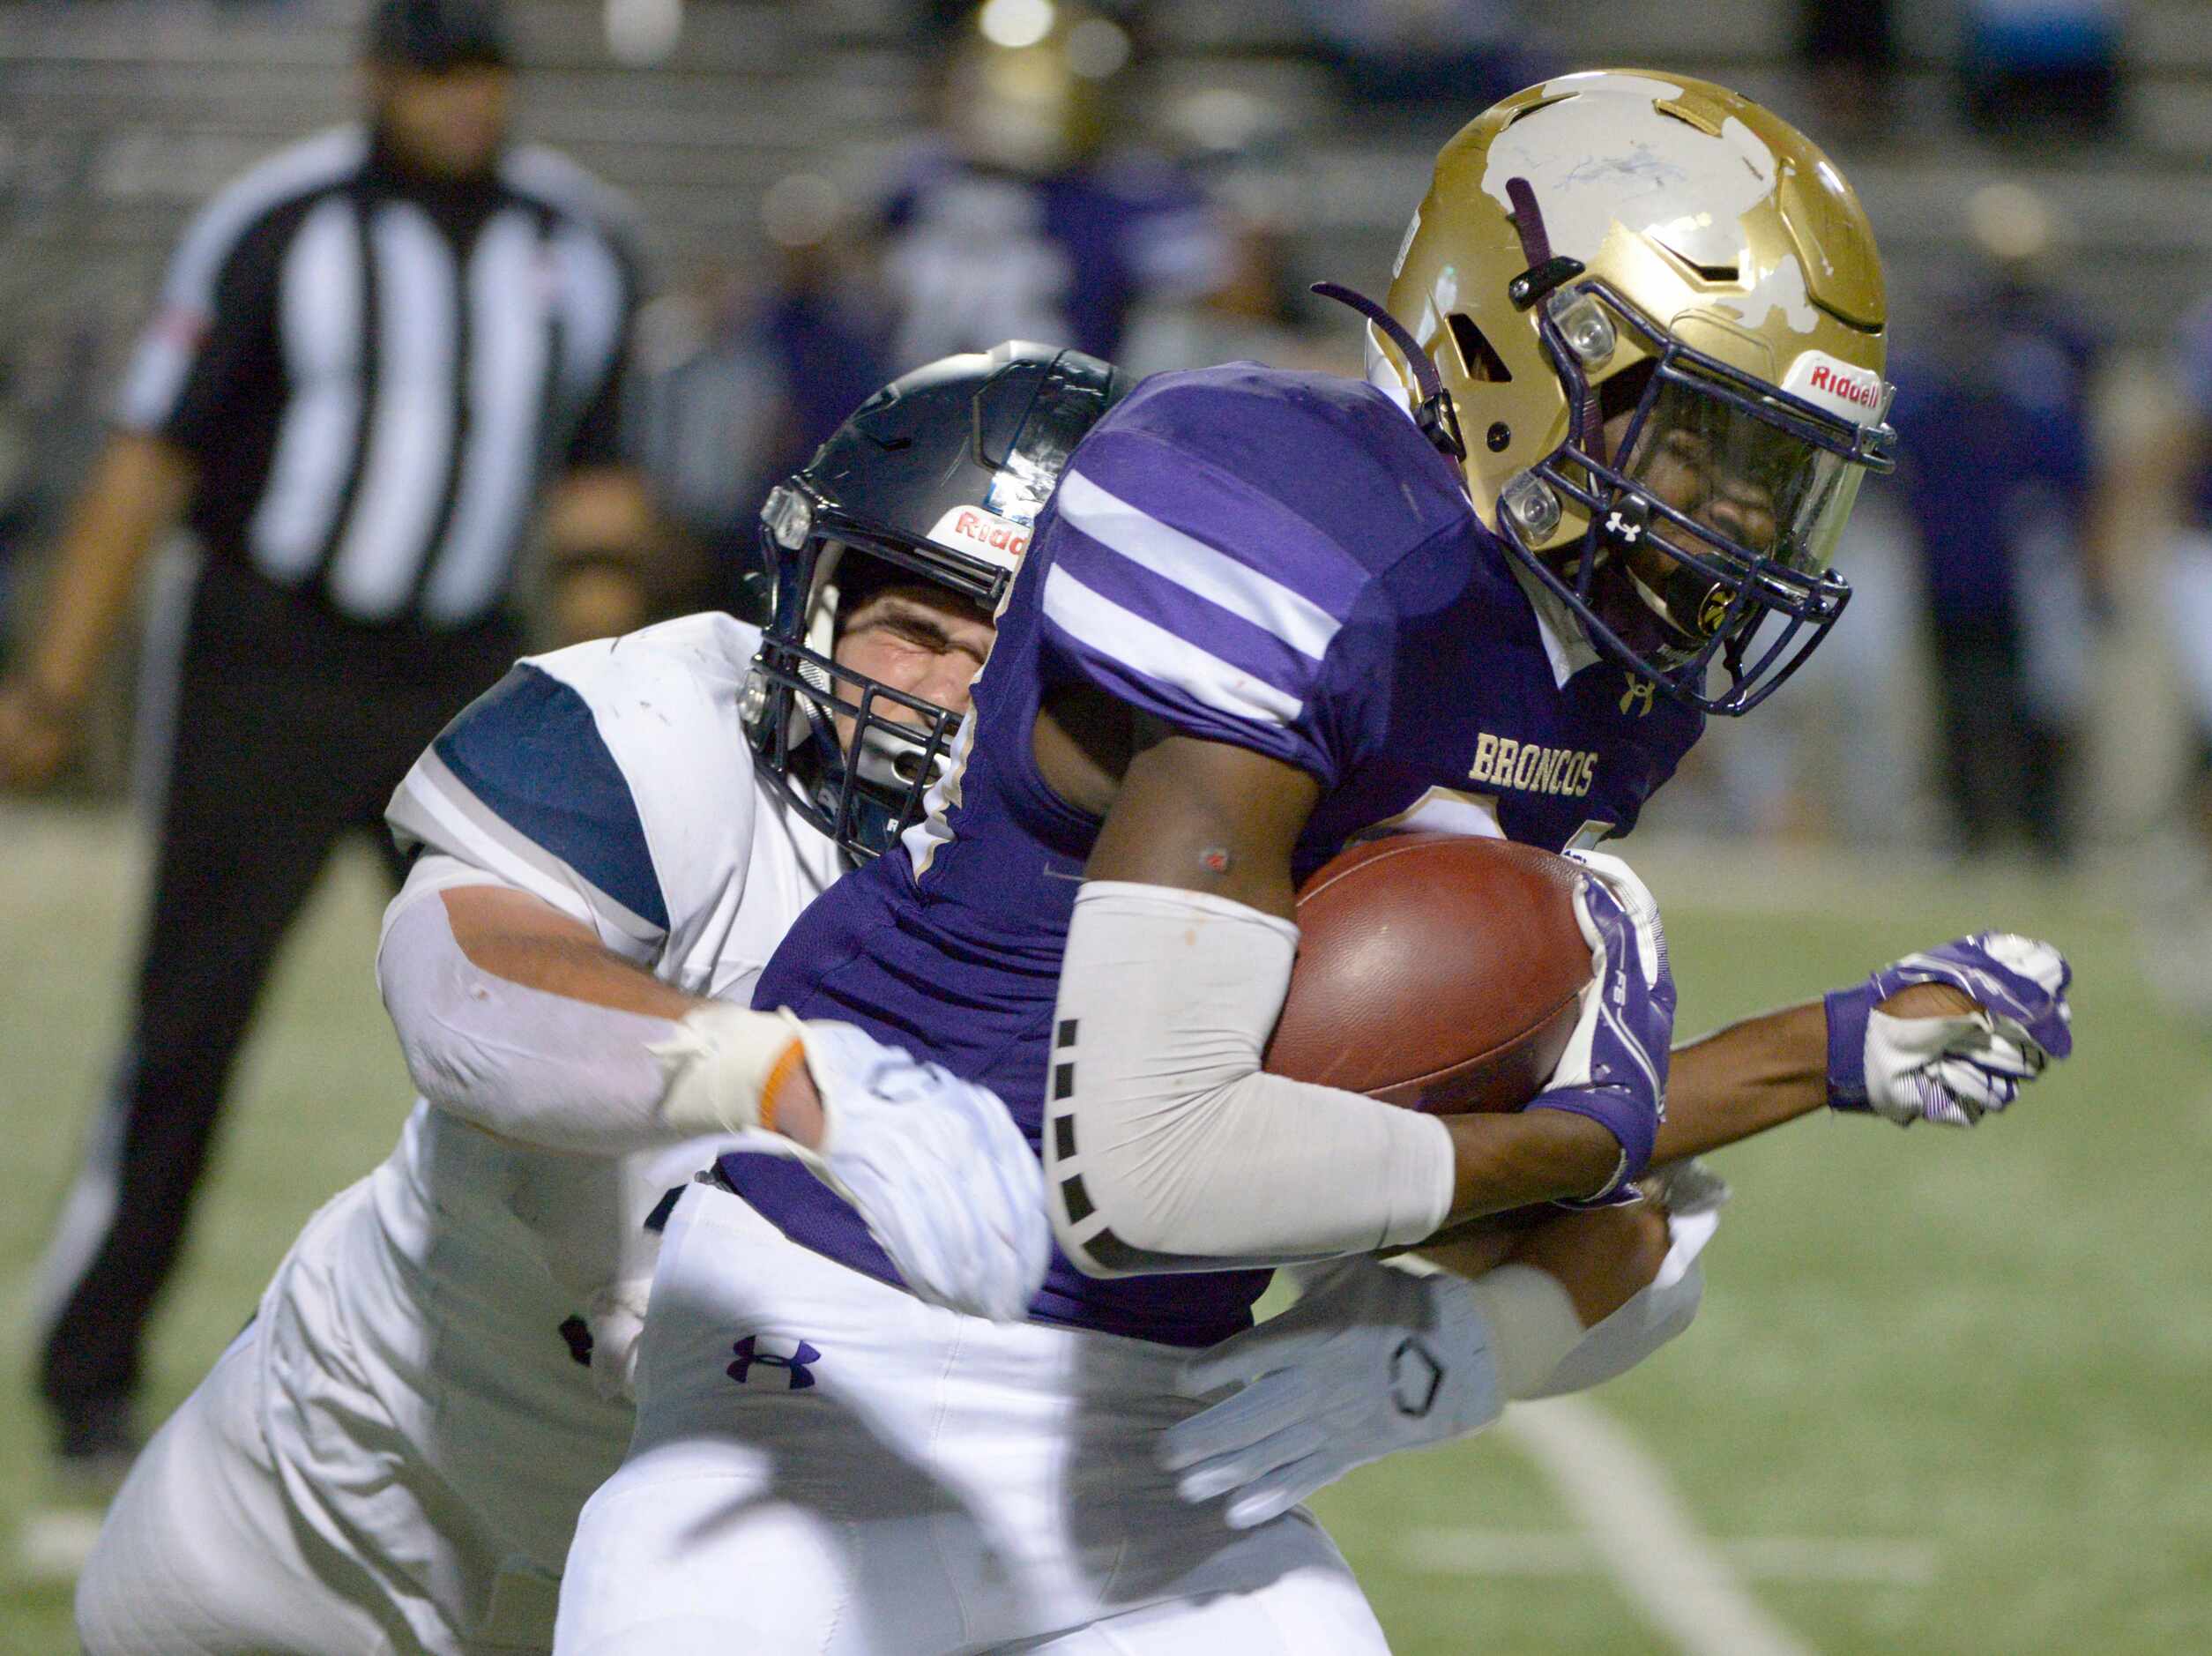 Denton’s Coco Brown (34) is tackled by Lone Star’s Alessio Russolillo in the second quarter...